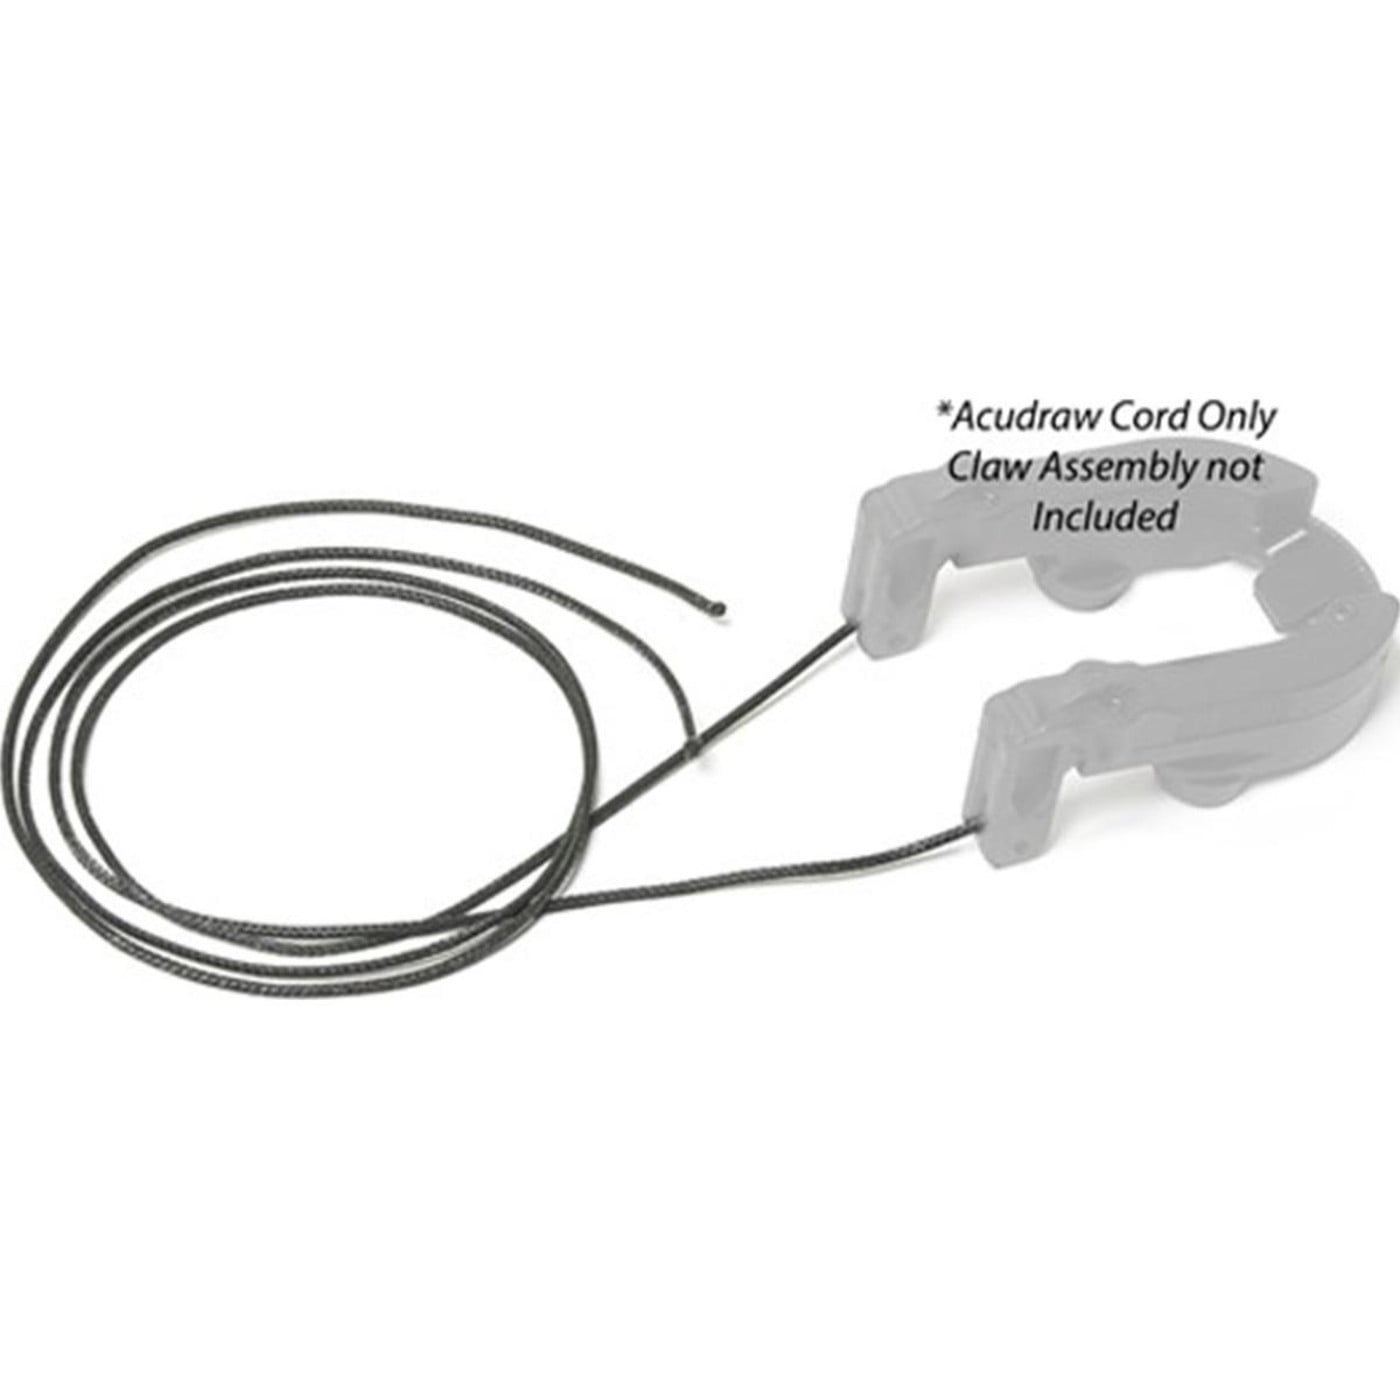 One Size TenPoint HCA-401 ACUdraw Replacement Draw Cord